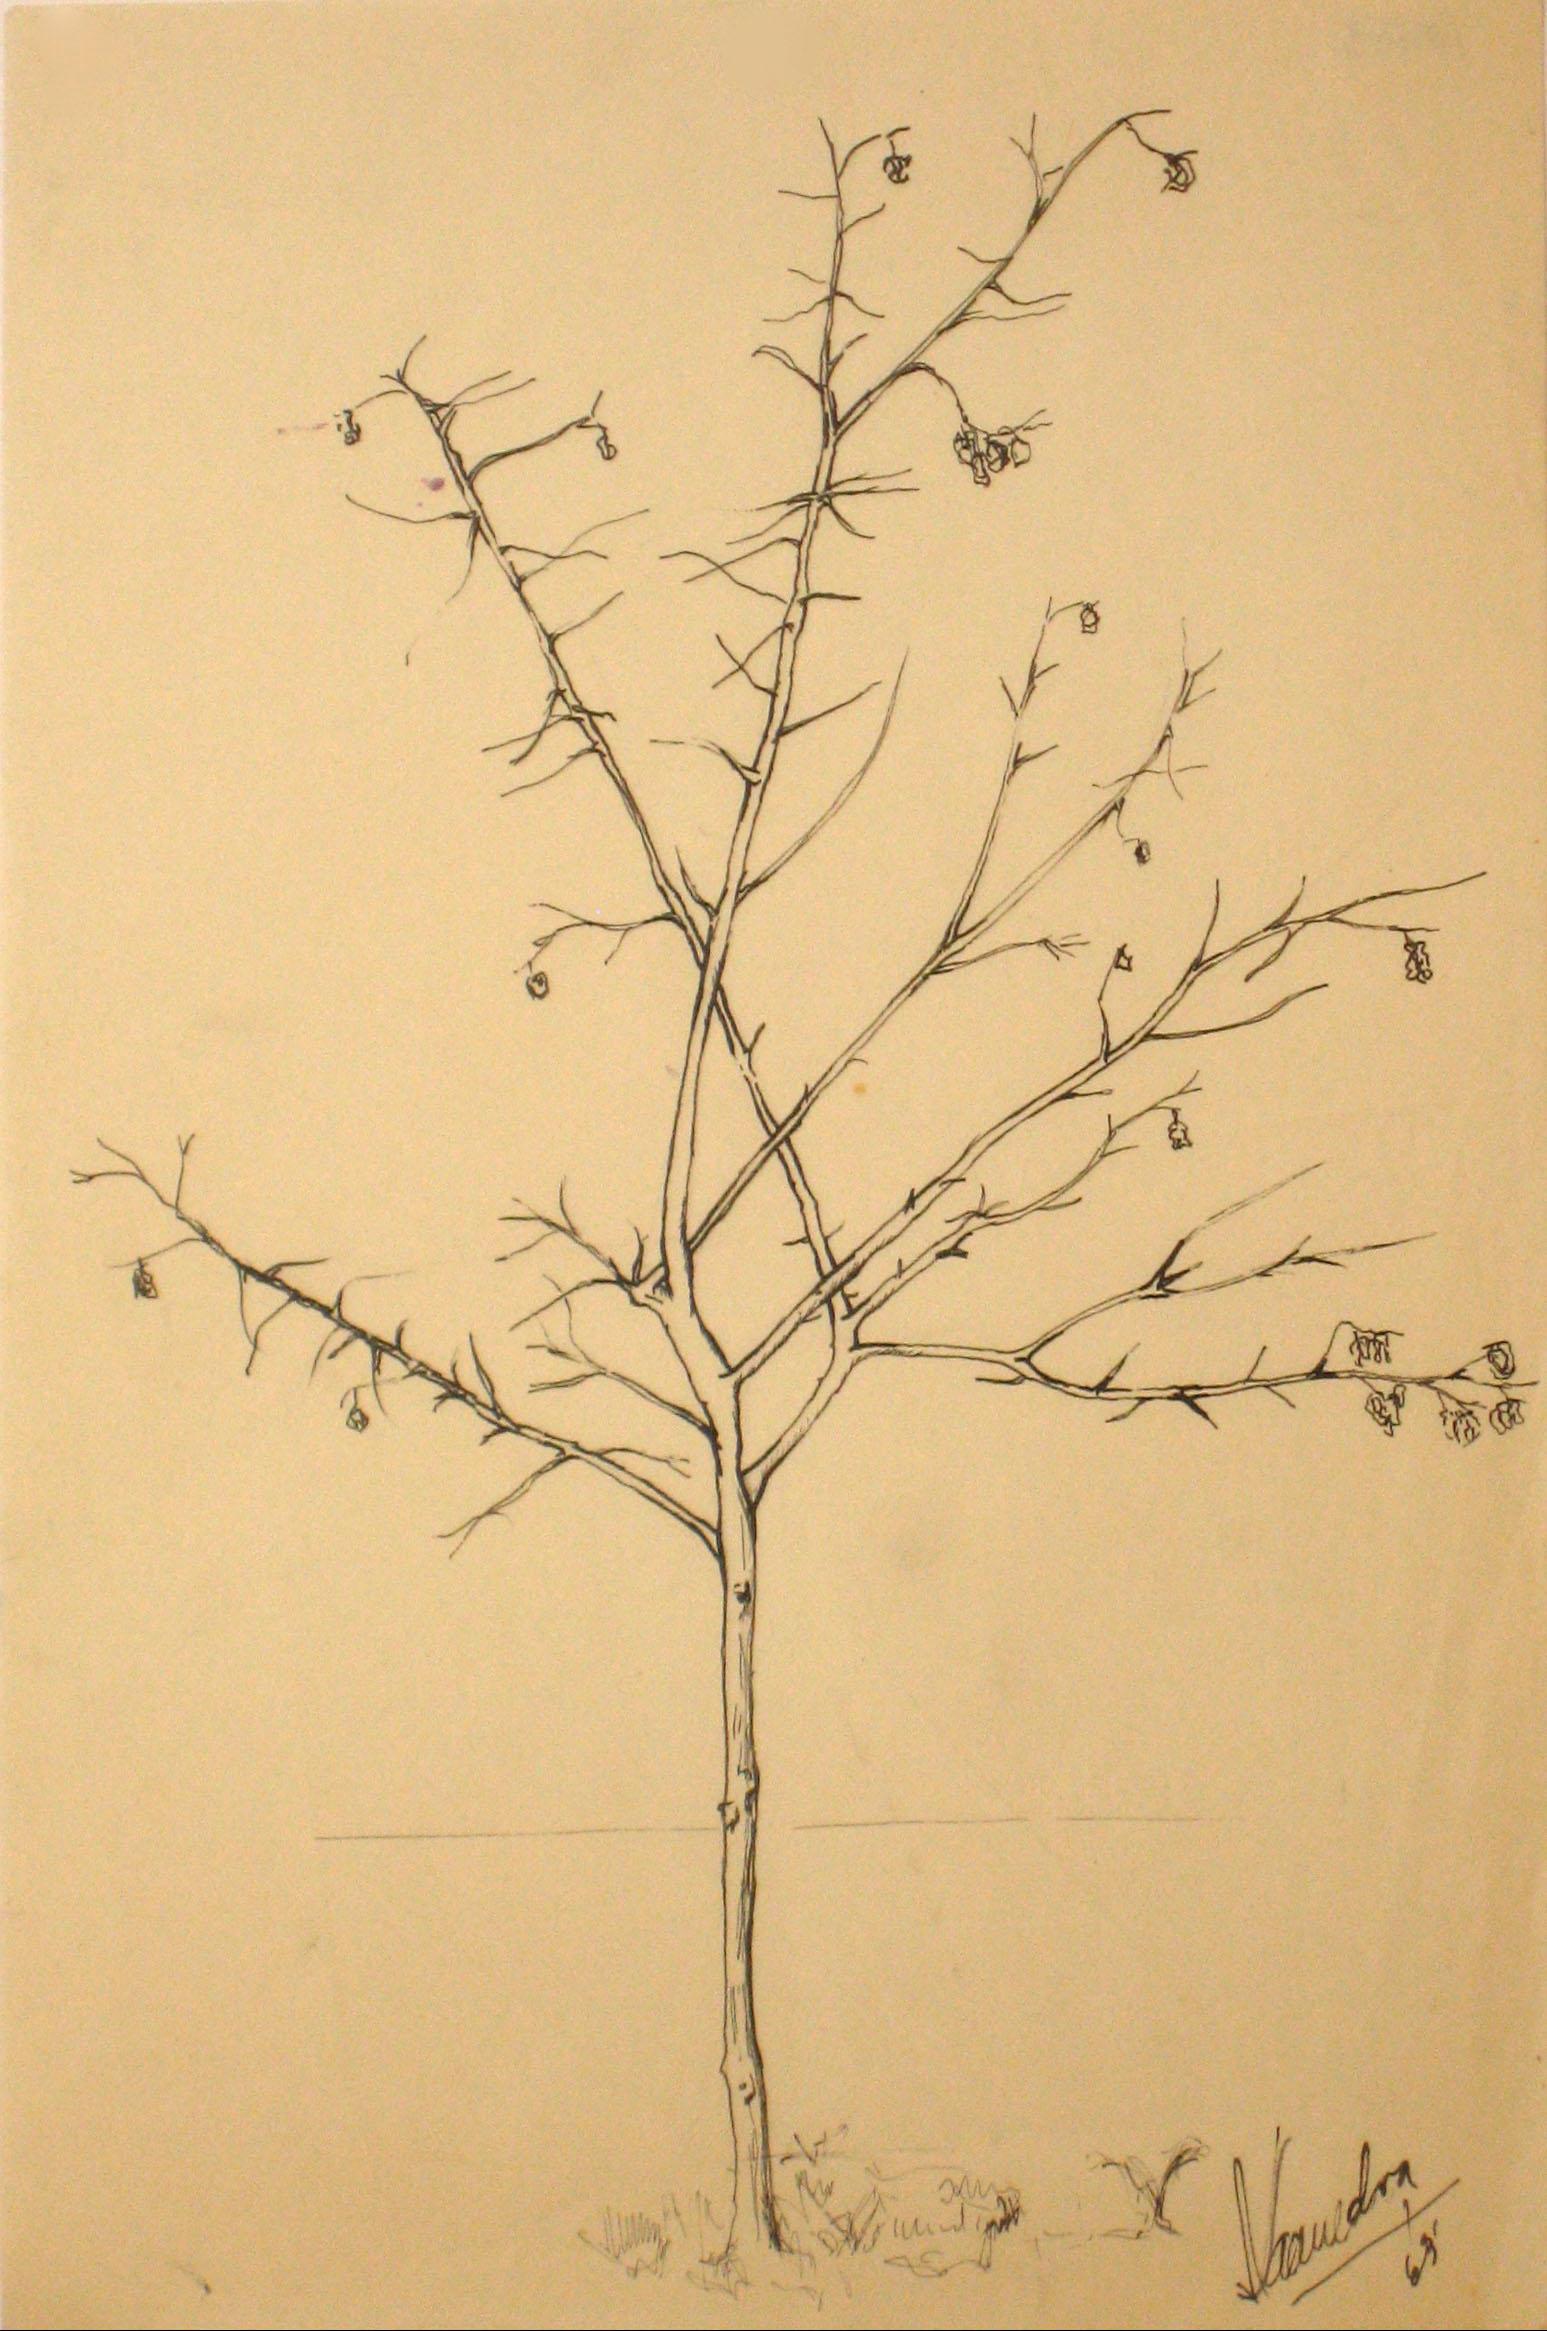 Unknown Still-Life - 1960s Vintage Drawing of a Tree with Flowers 